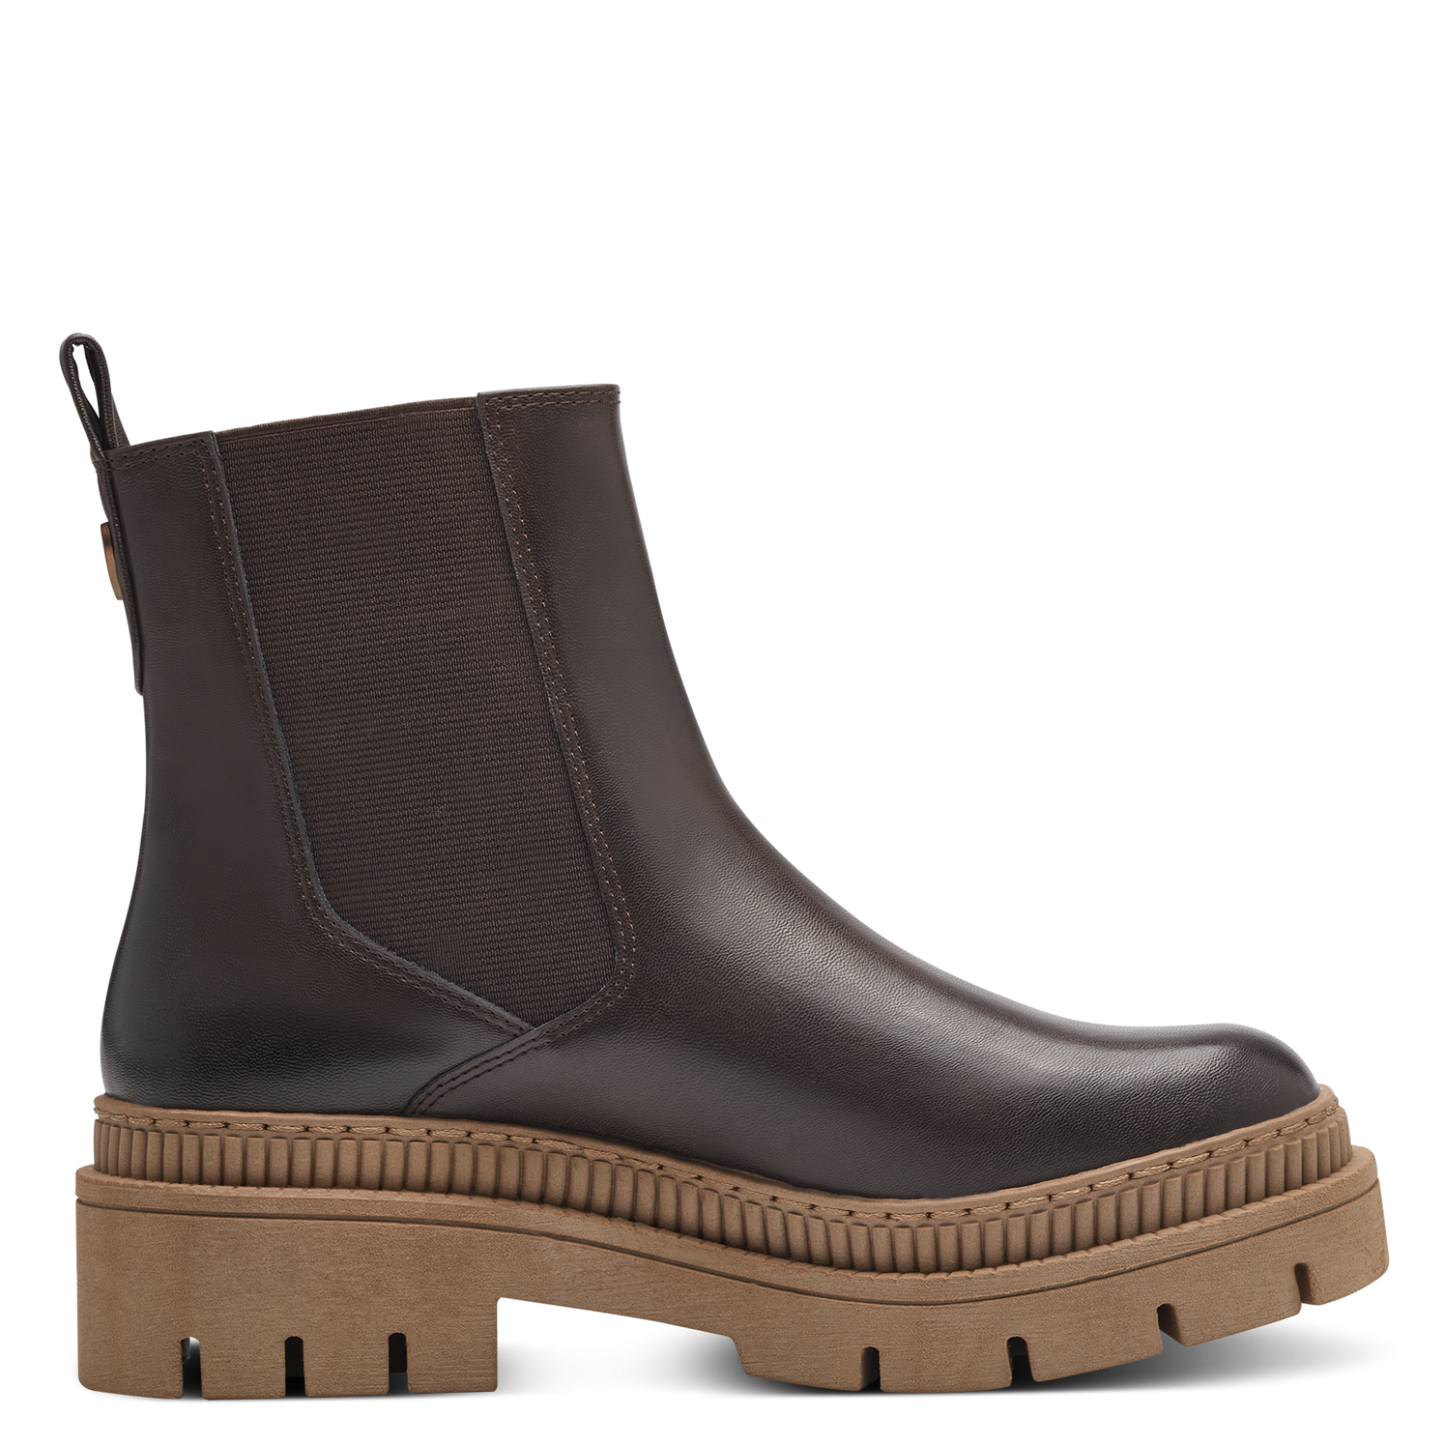 Marco Tozzi Chunky Chelsea Boots - Choc brown/natural